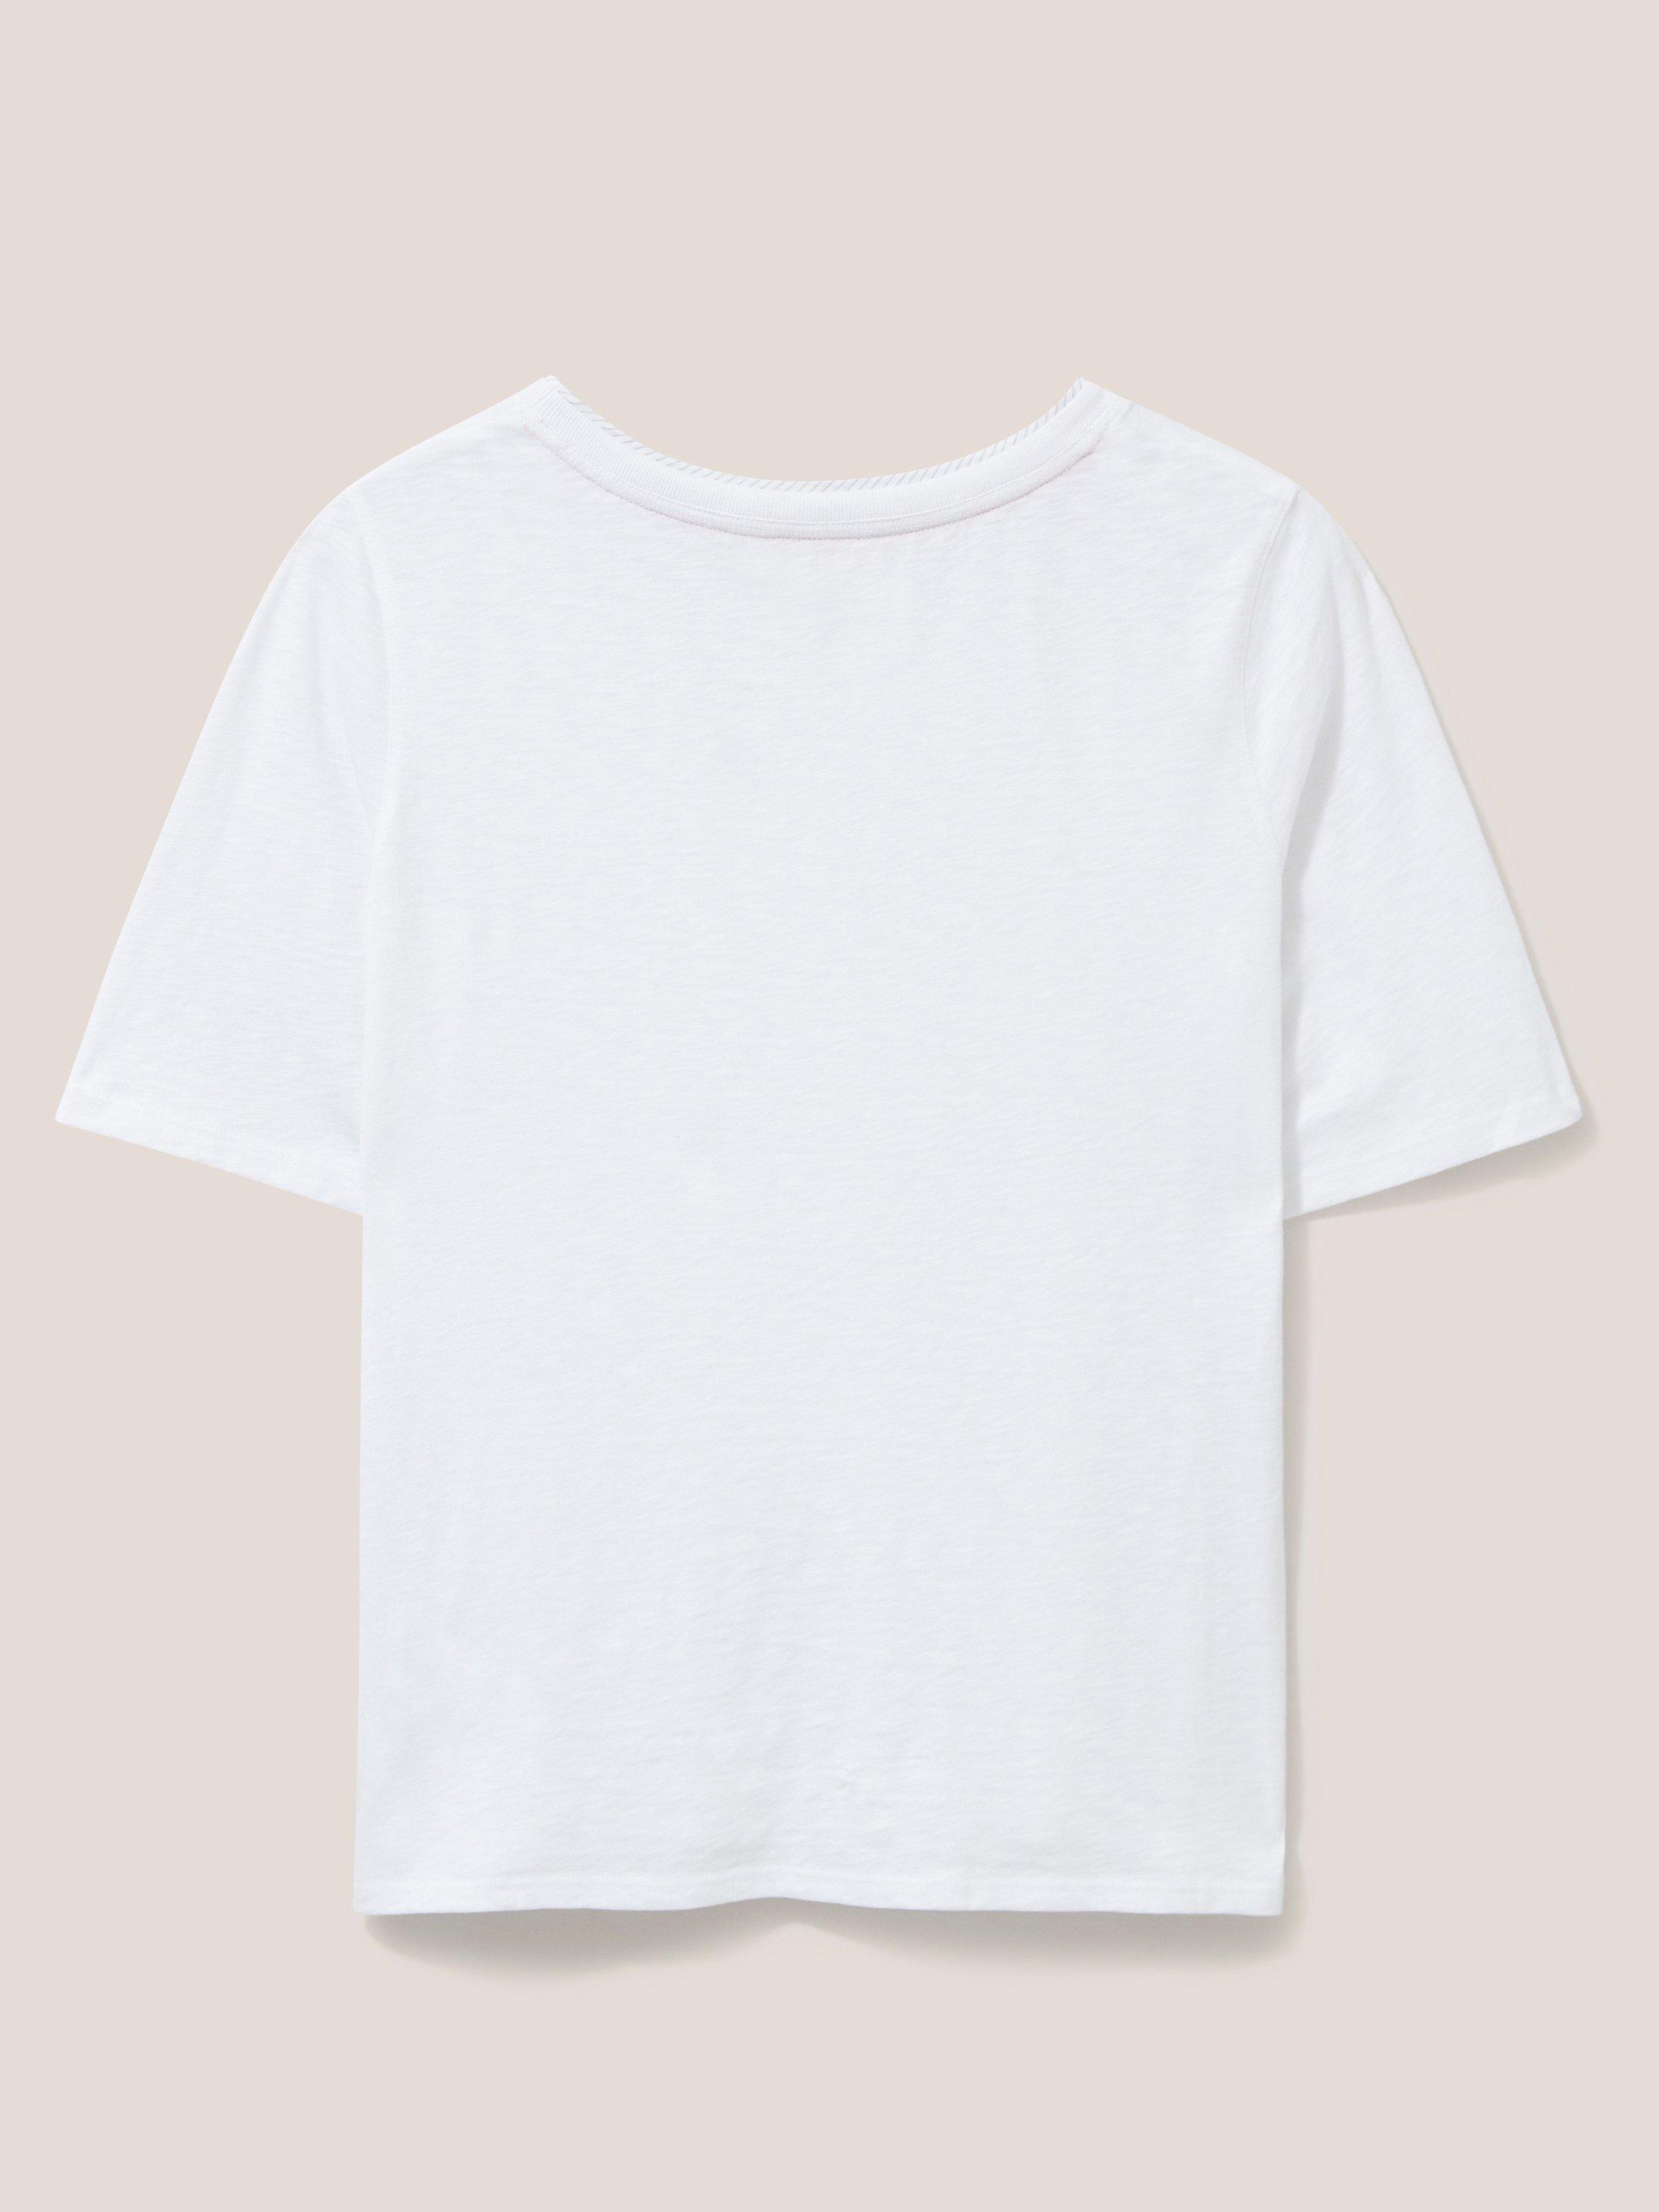 ANNABEL TEE in BRIL WHITE - FLAT BACK